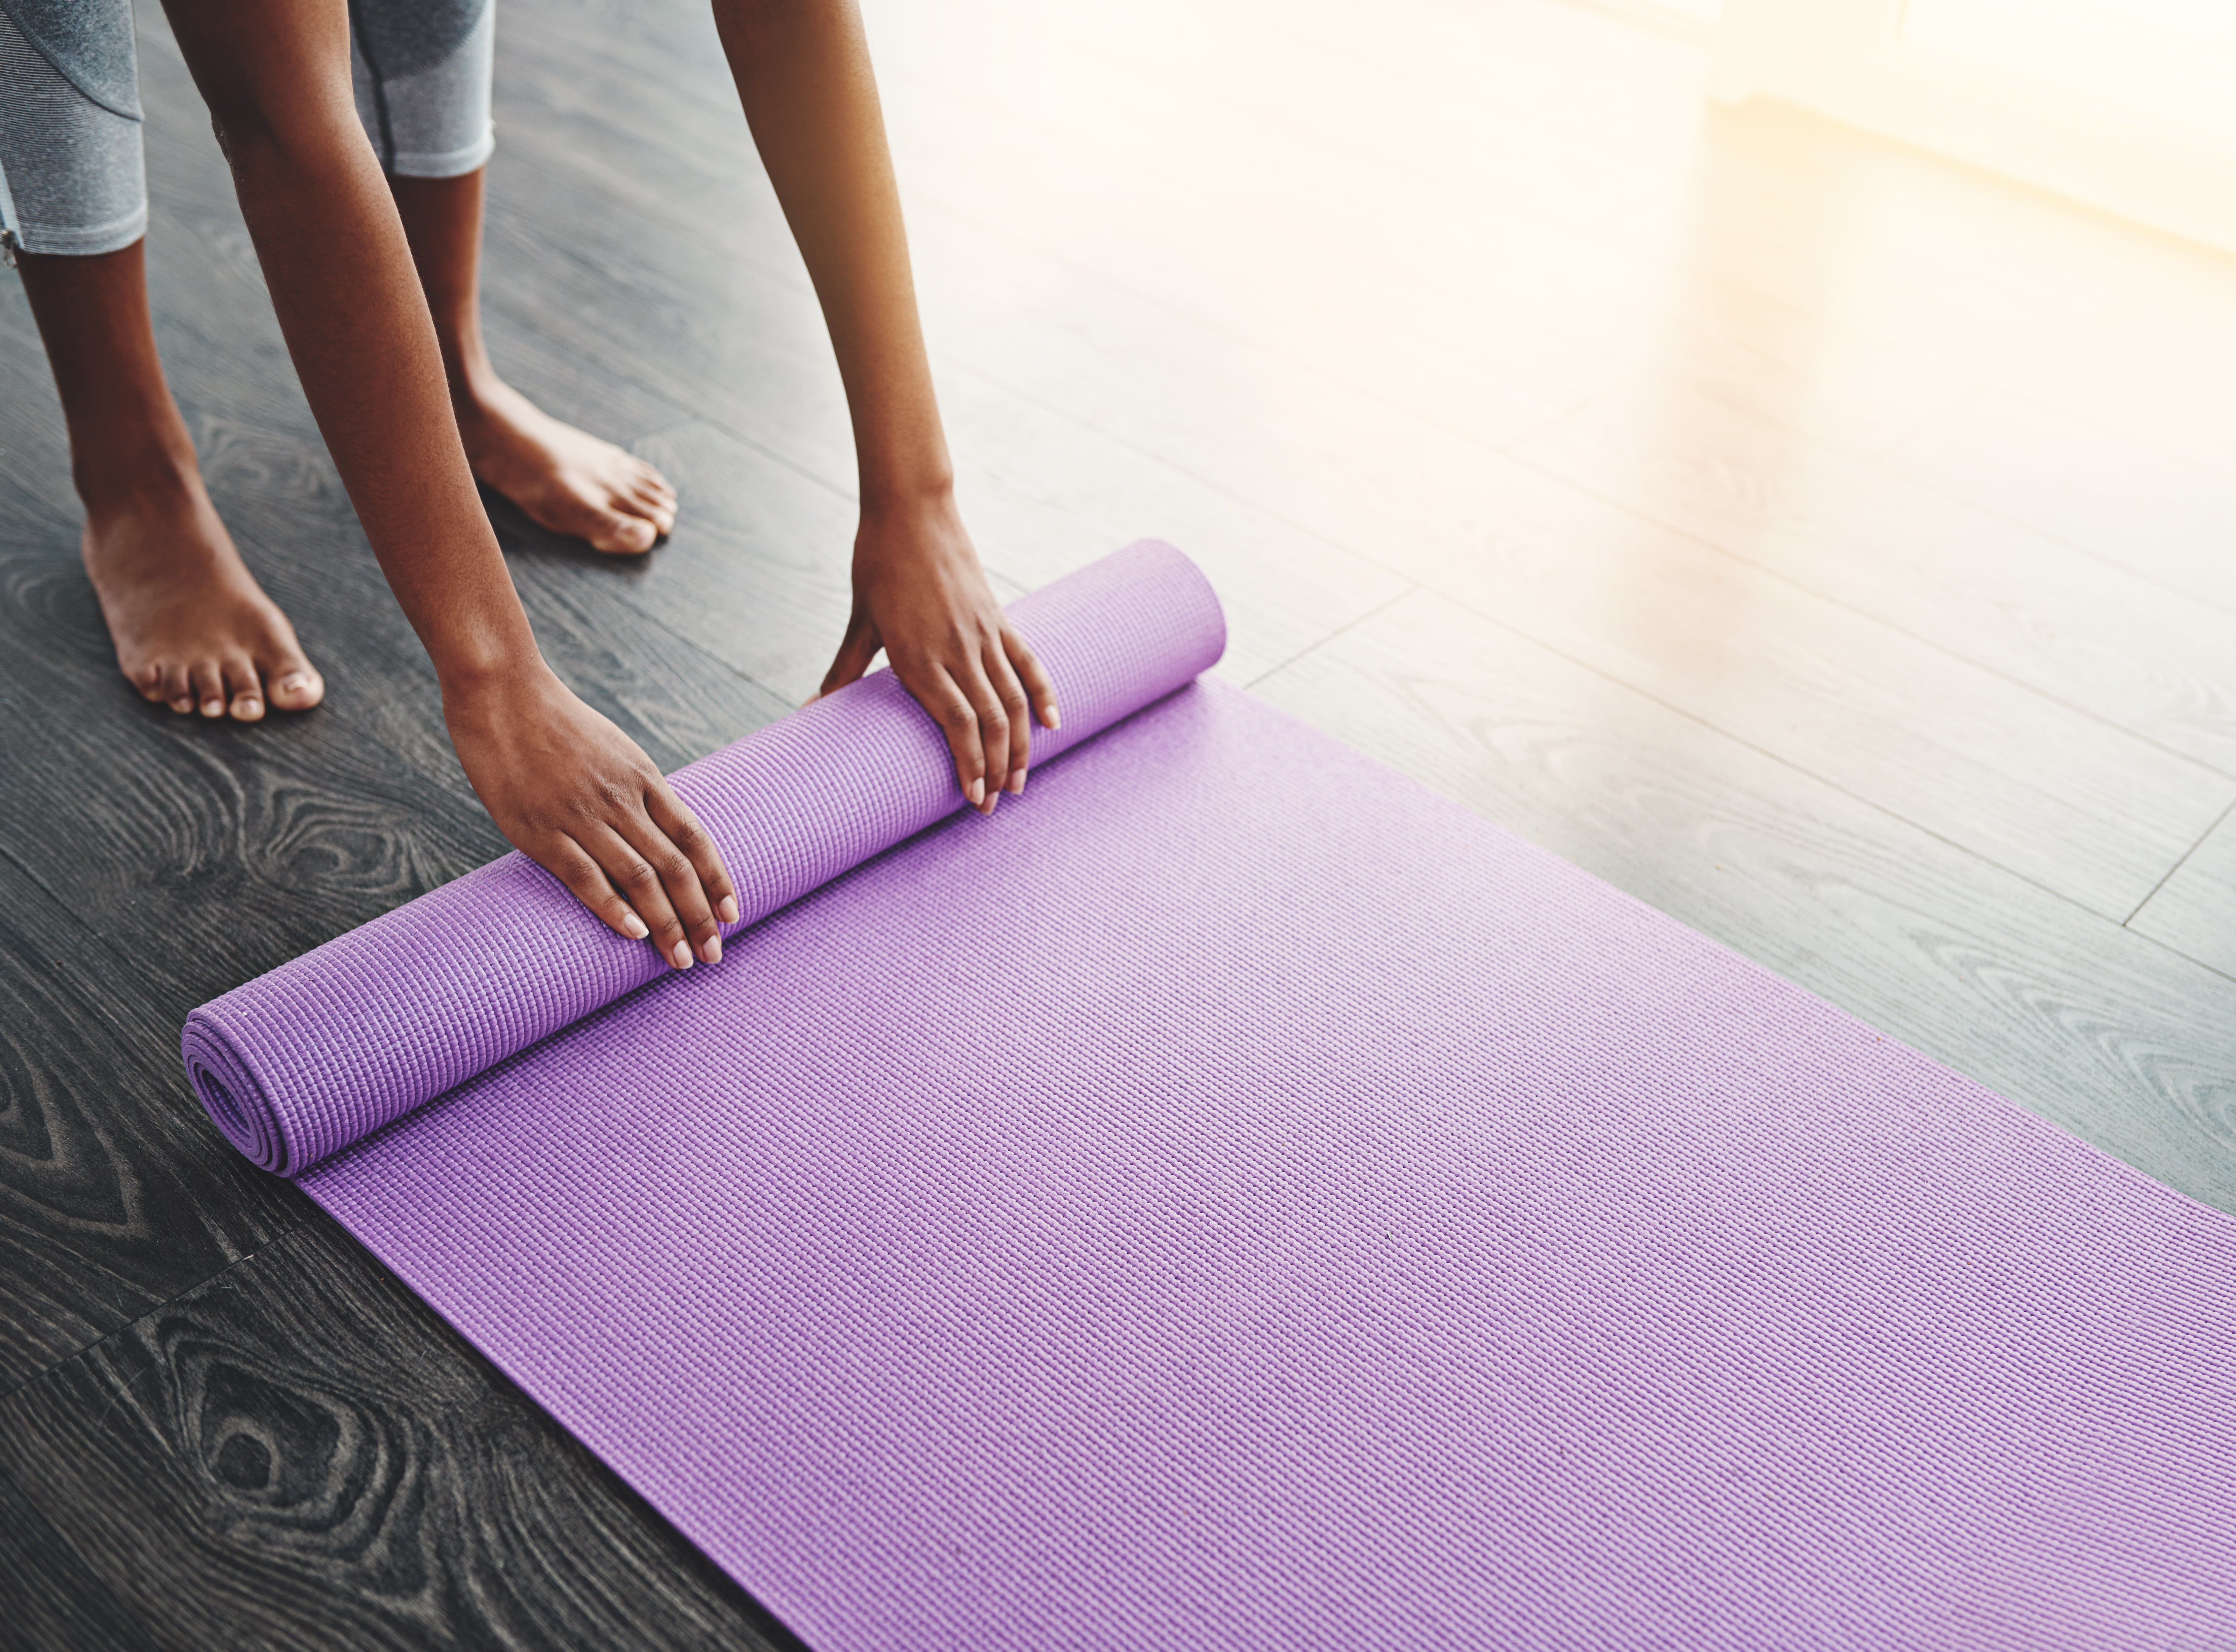 How to clean your yoga mat without ruining it - Saga Exceptional